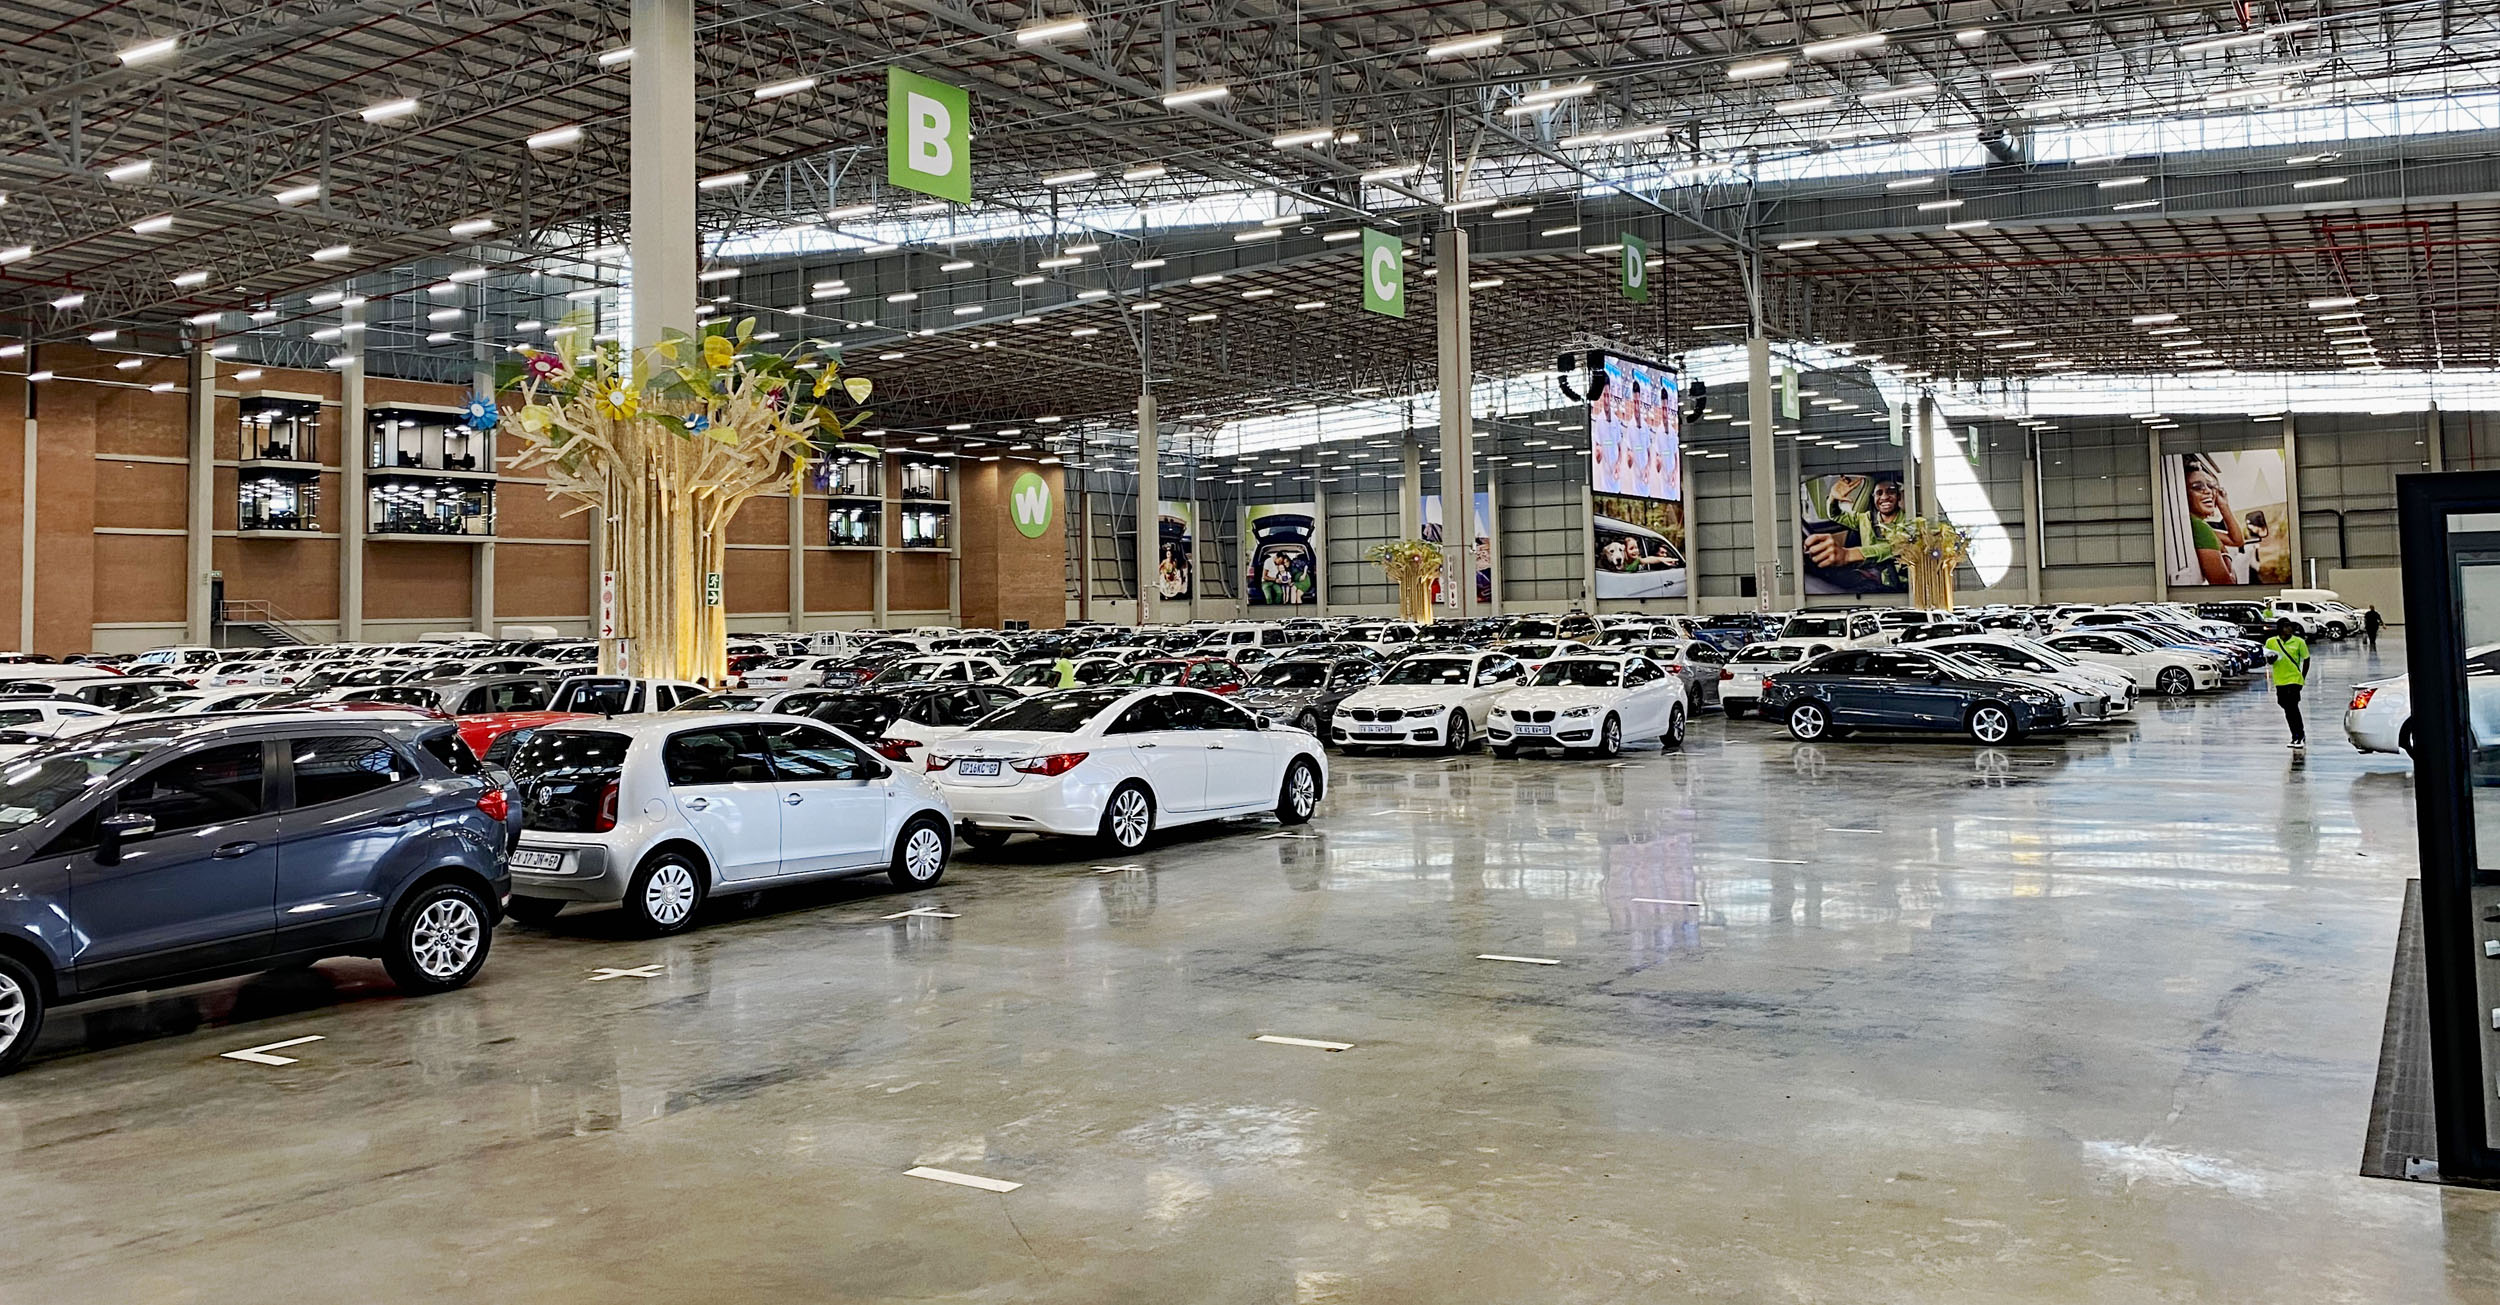 webuycars, weelee, inside the new weelee megastore taking on webuycars – facts and photos